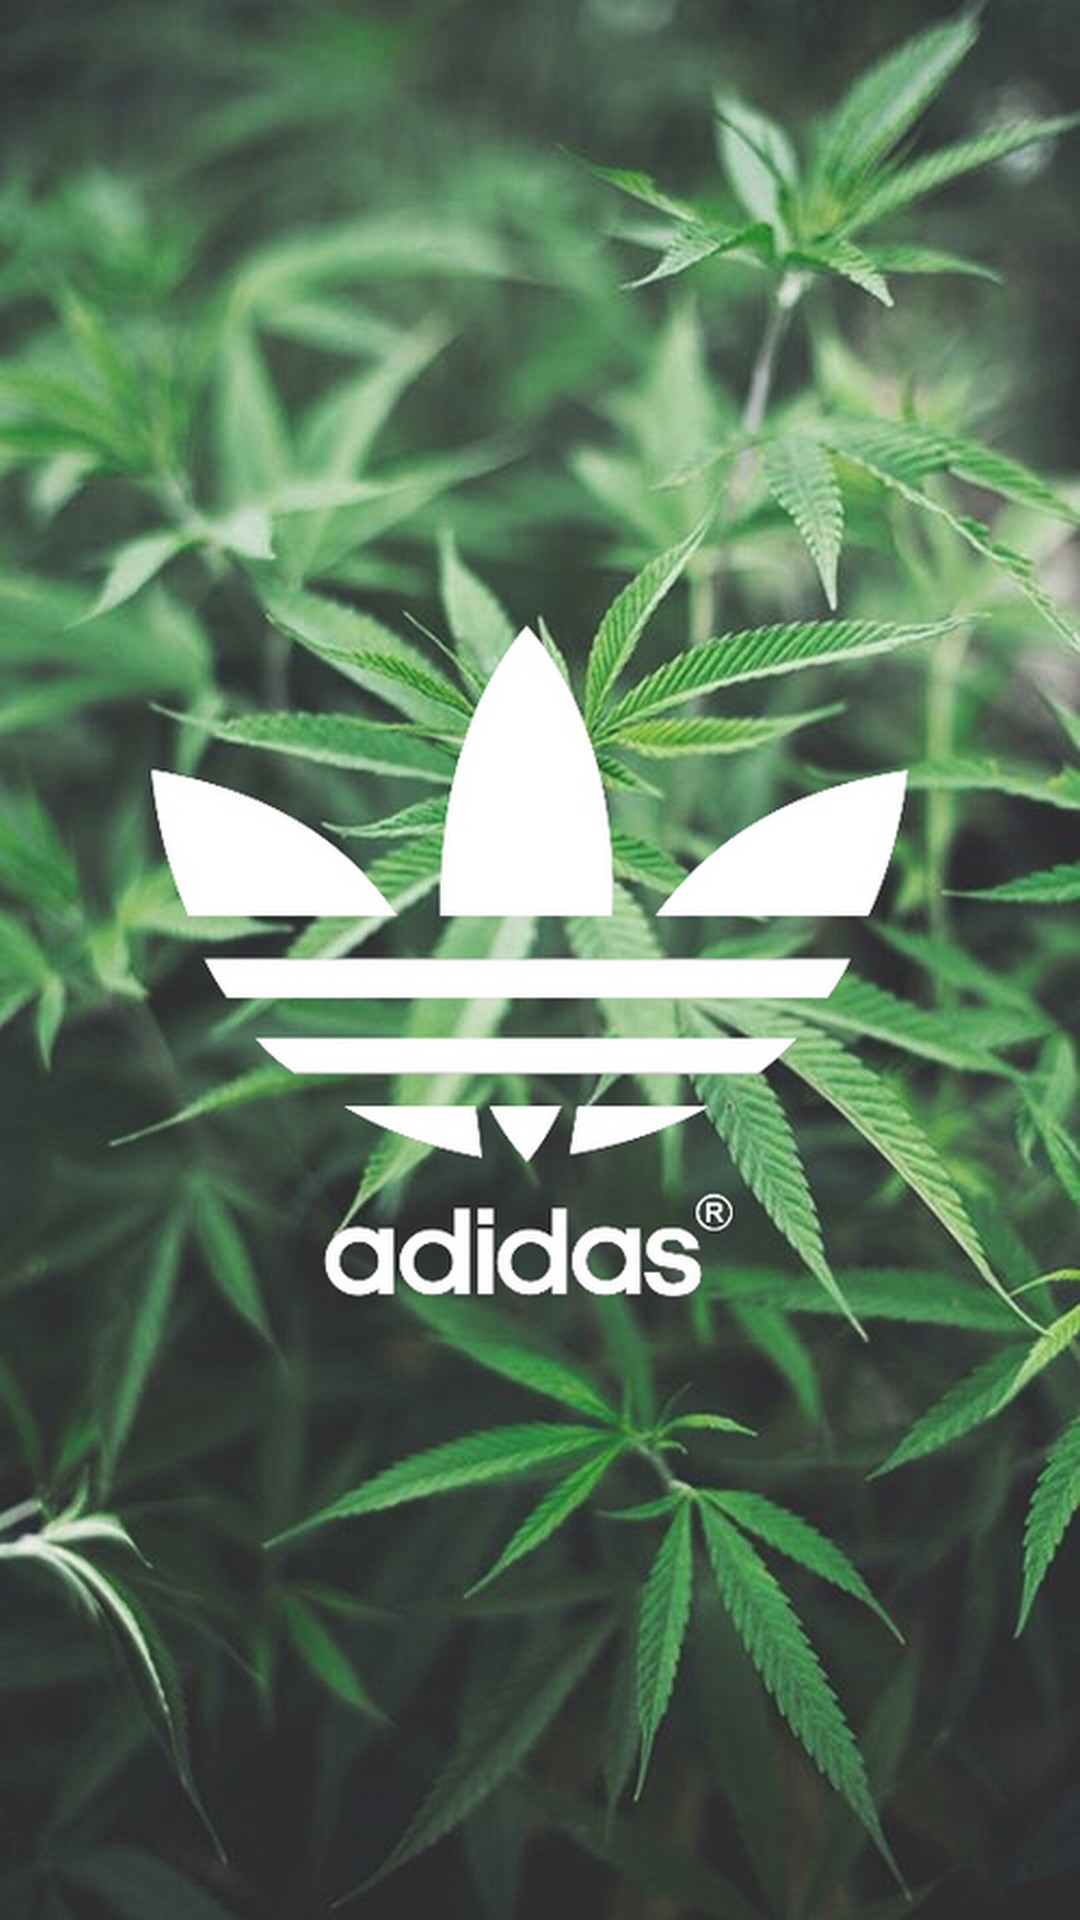 Logo Adidas iPhone Backgrounds With high-resolution 1080X1920 pixel. You can set as wallpaper for Apple iPhone X, XS Max, XR, 8, 7, 6, SE, iPad. Enjoy and share your favorite HD wallpapers and background images